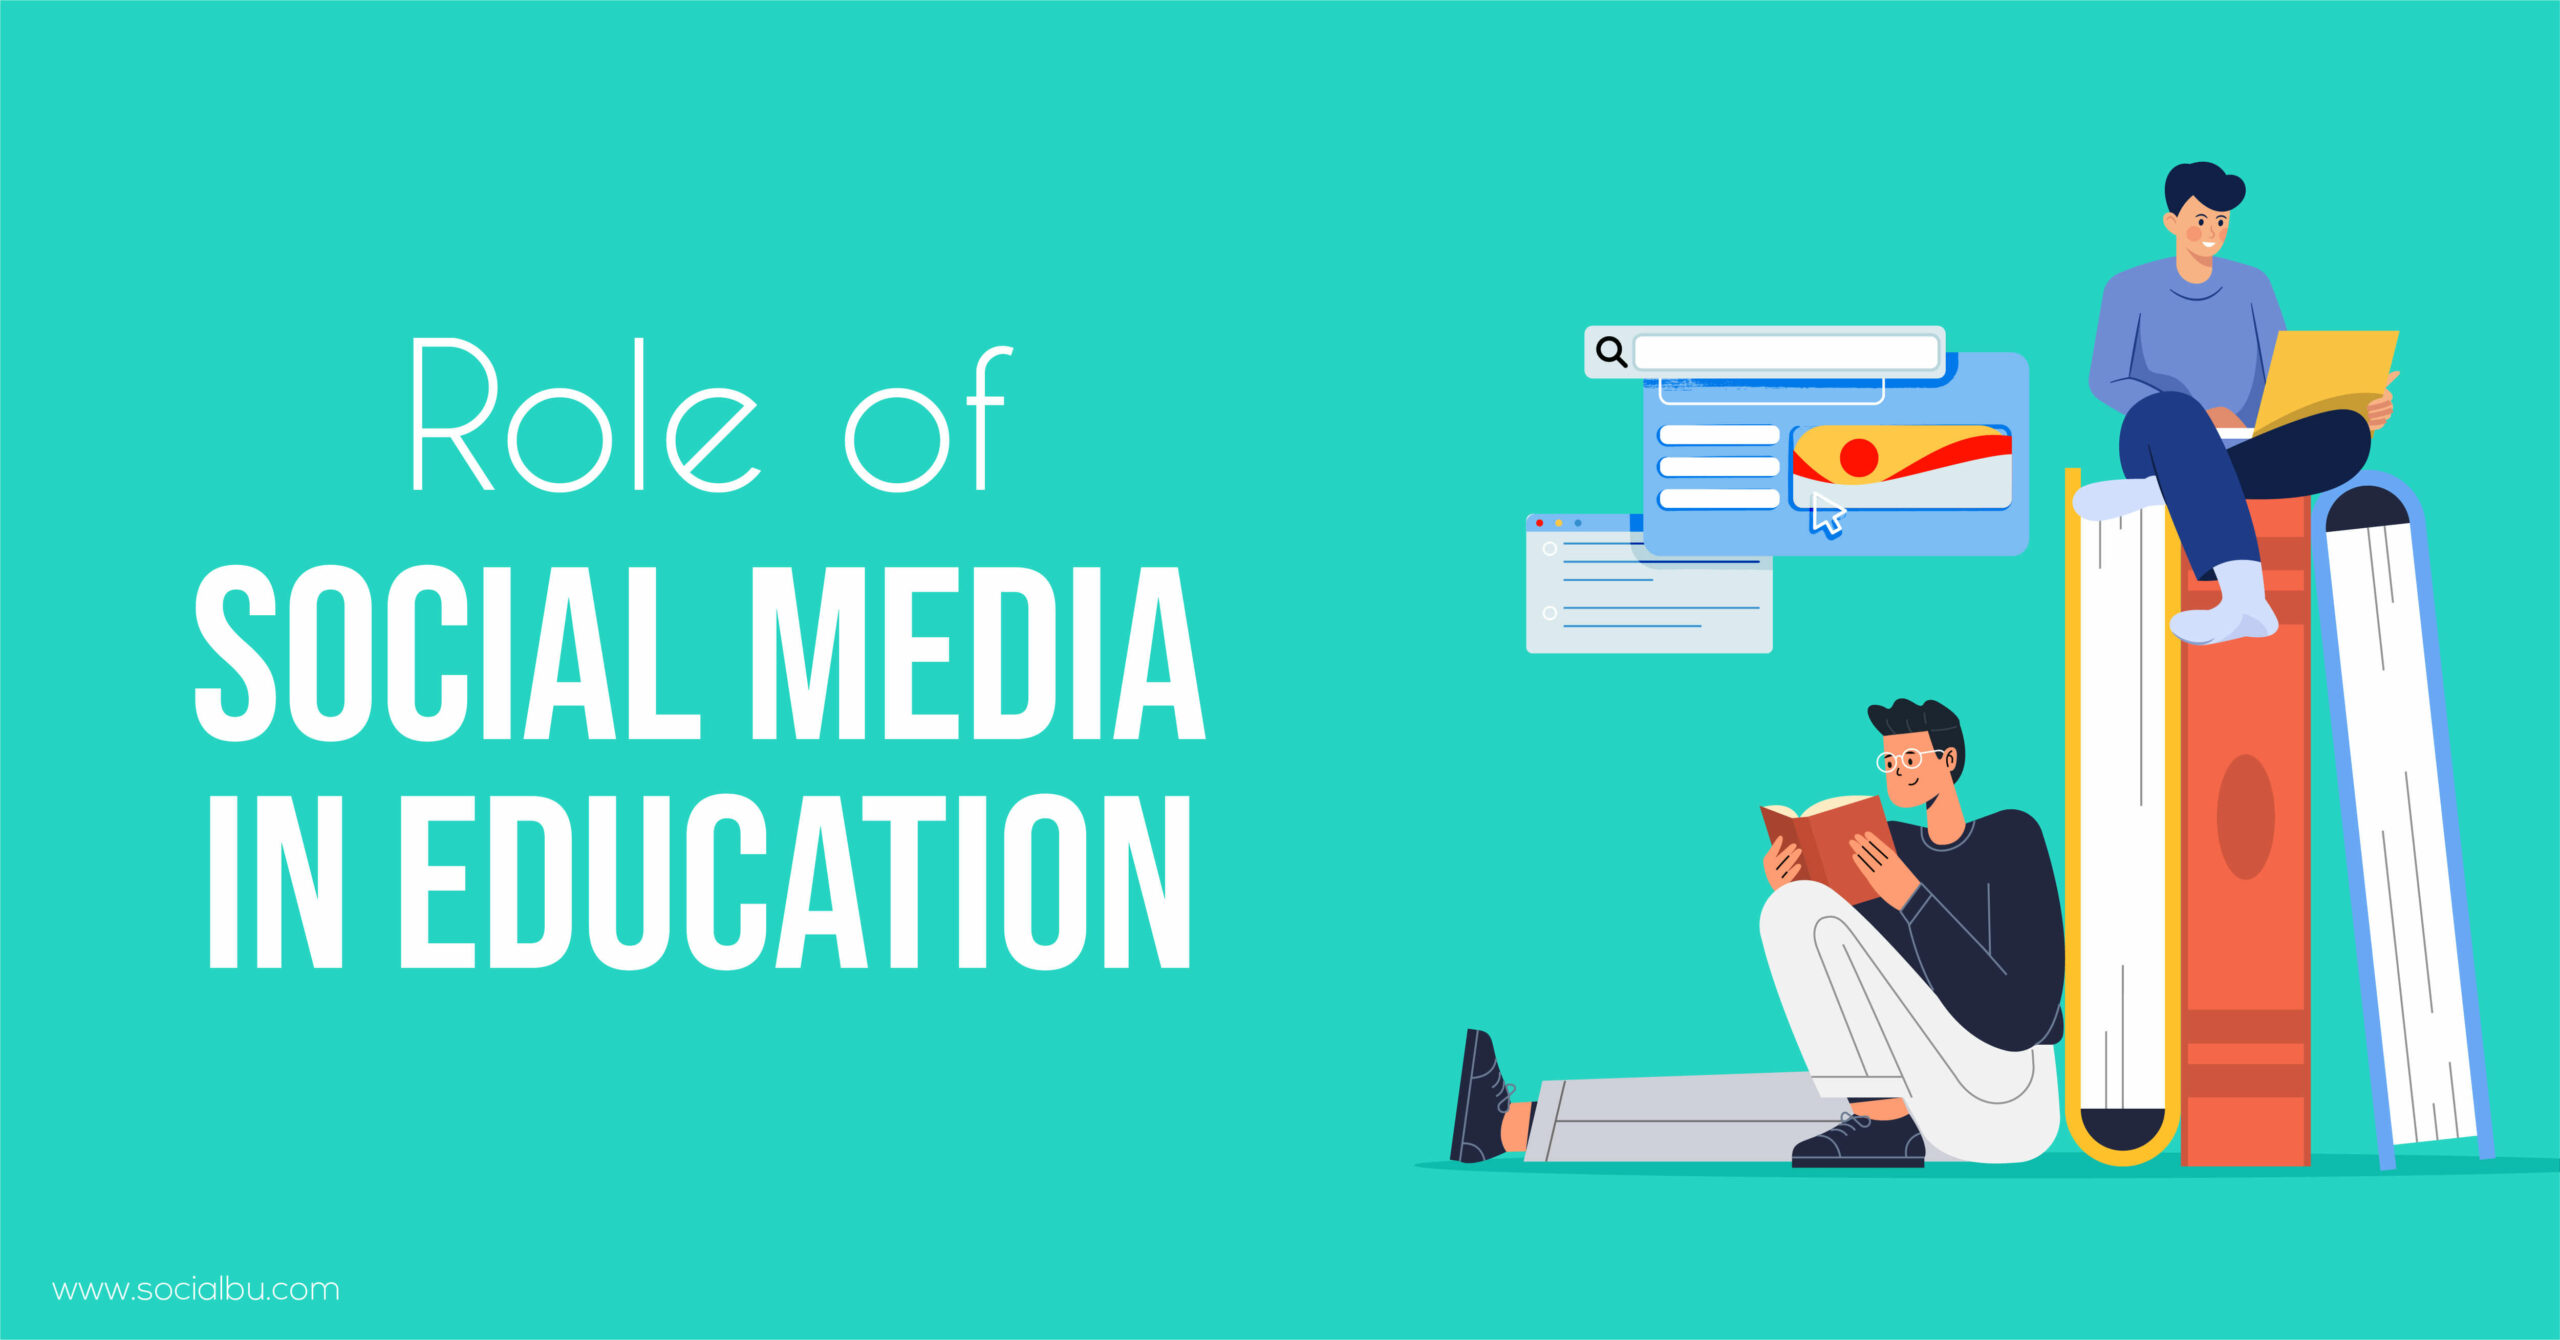 social media and education research paper